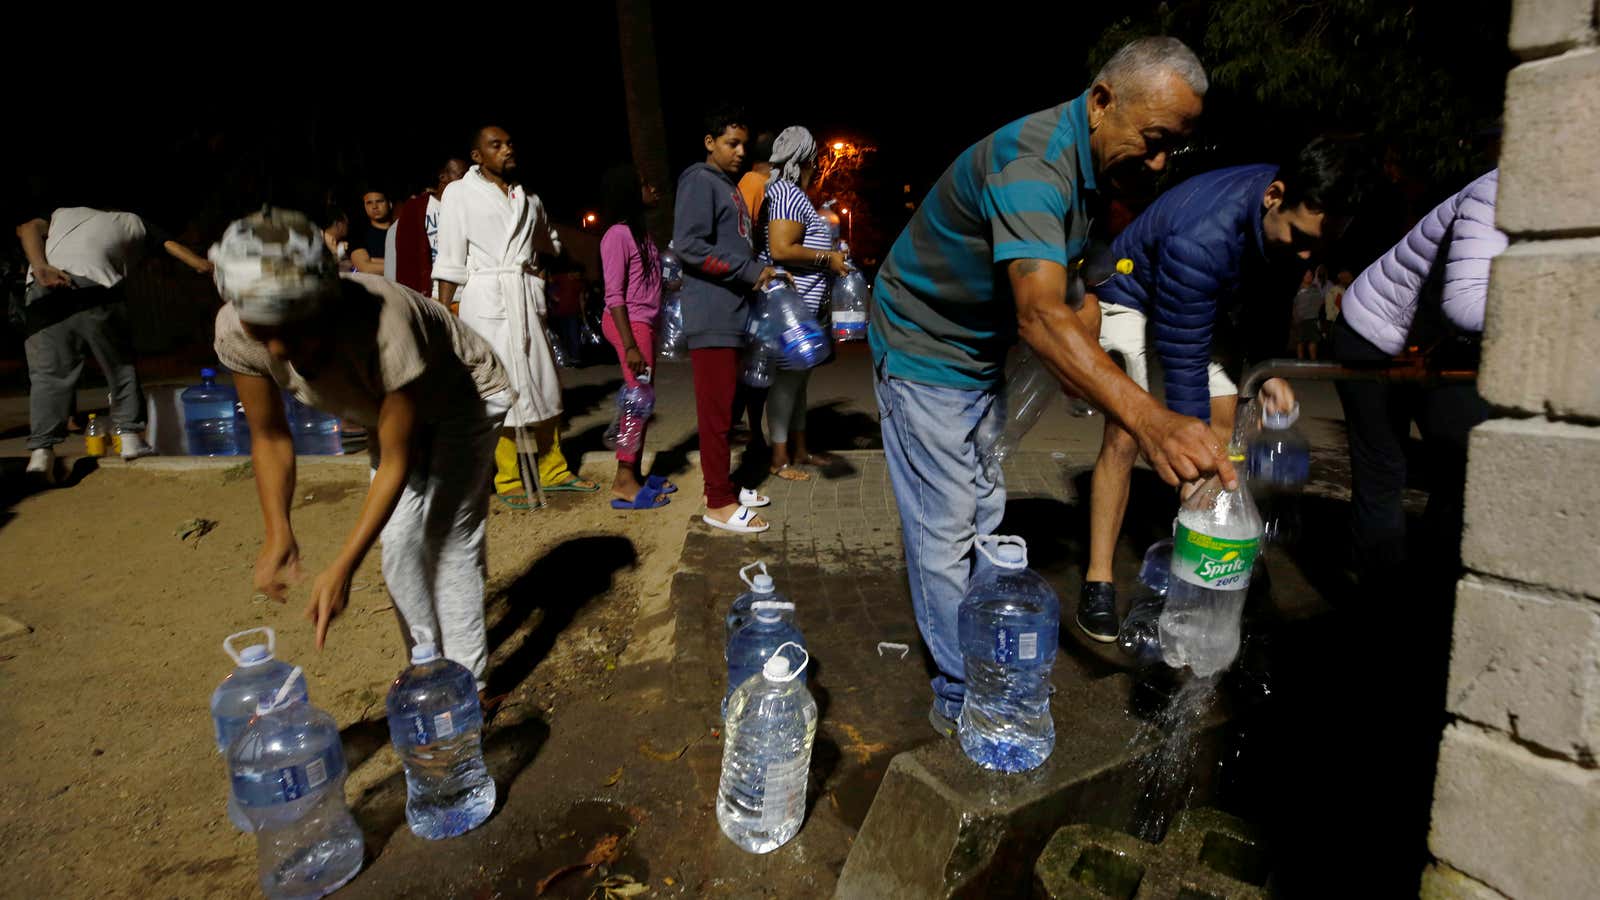 People fill up containers with spring water in Cape Town on Jan. 25, 2018.